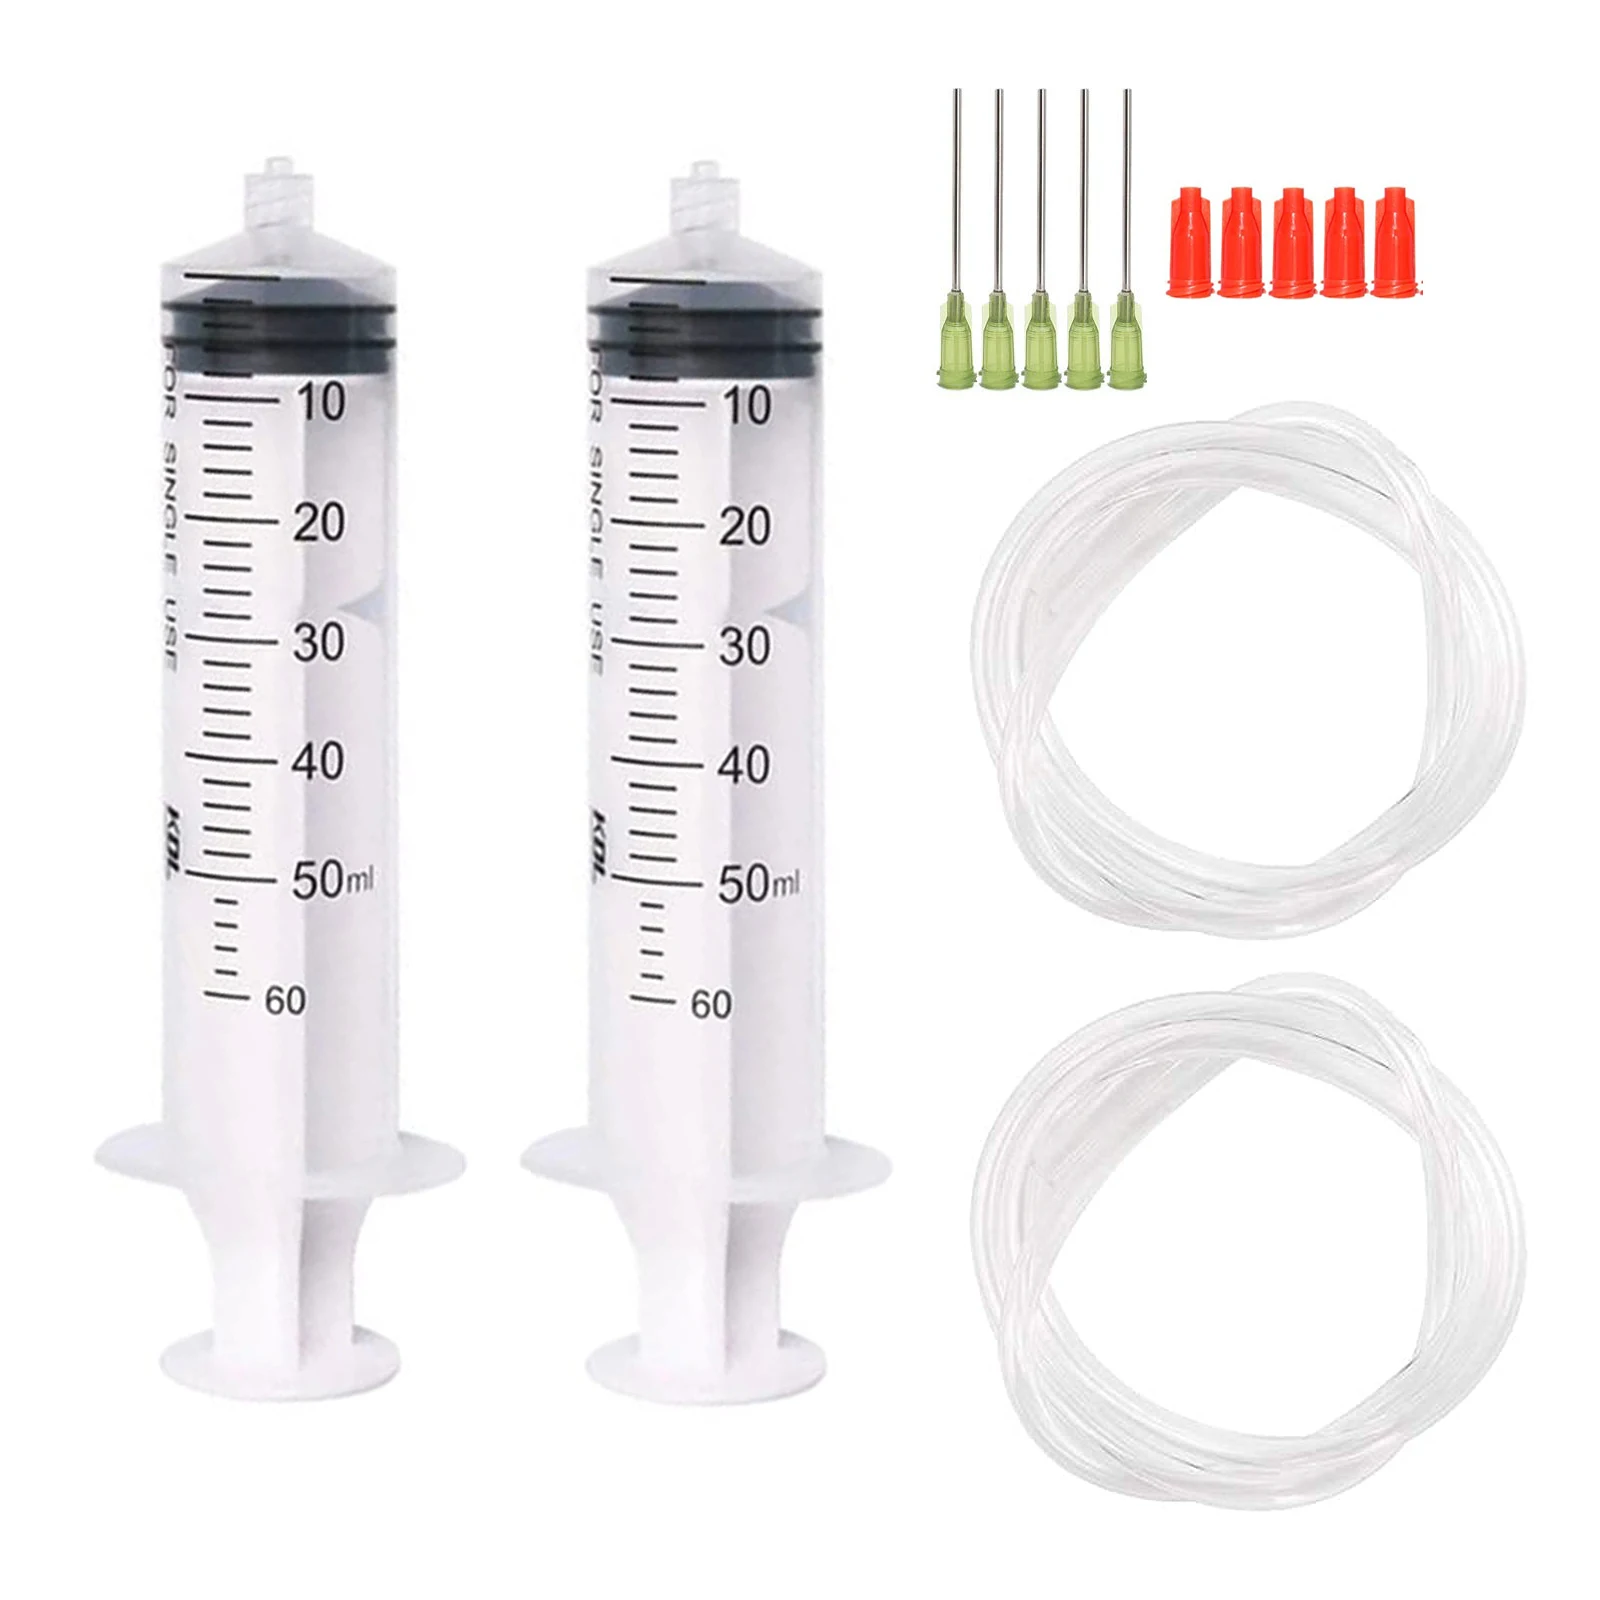 For Refilling and Measuring Liquids, Oil or Glue Applicator Blunt Tip  Needles With Syringe Caps and Needle Caps